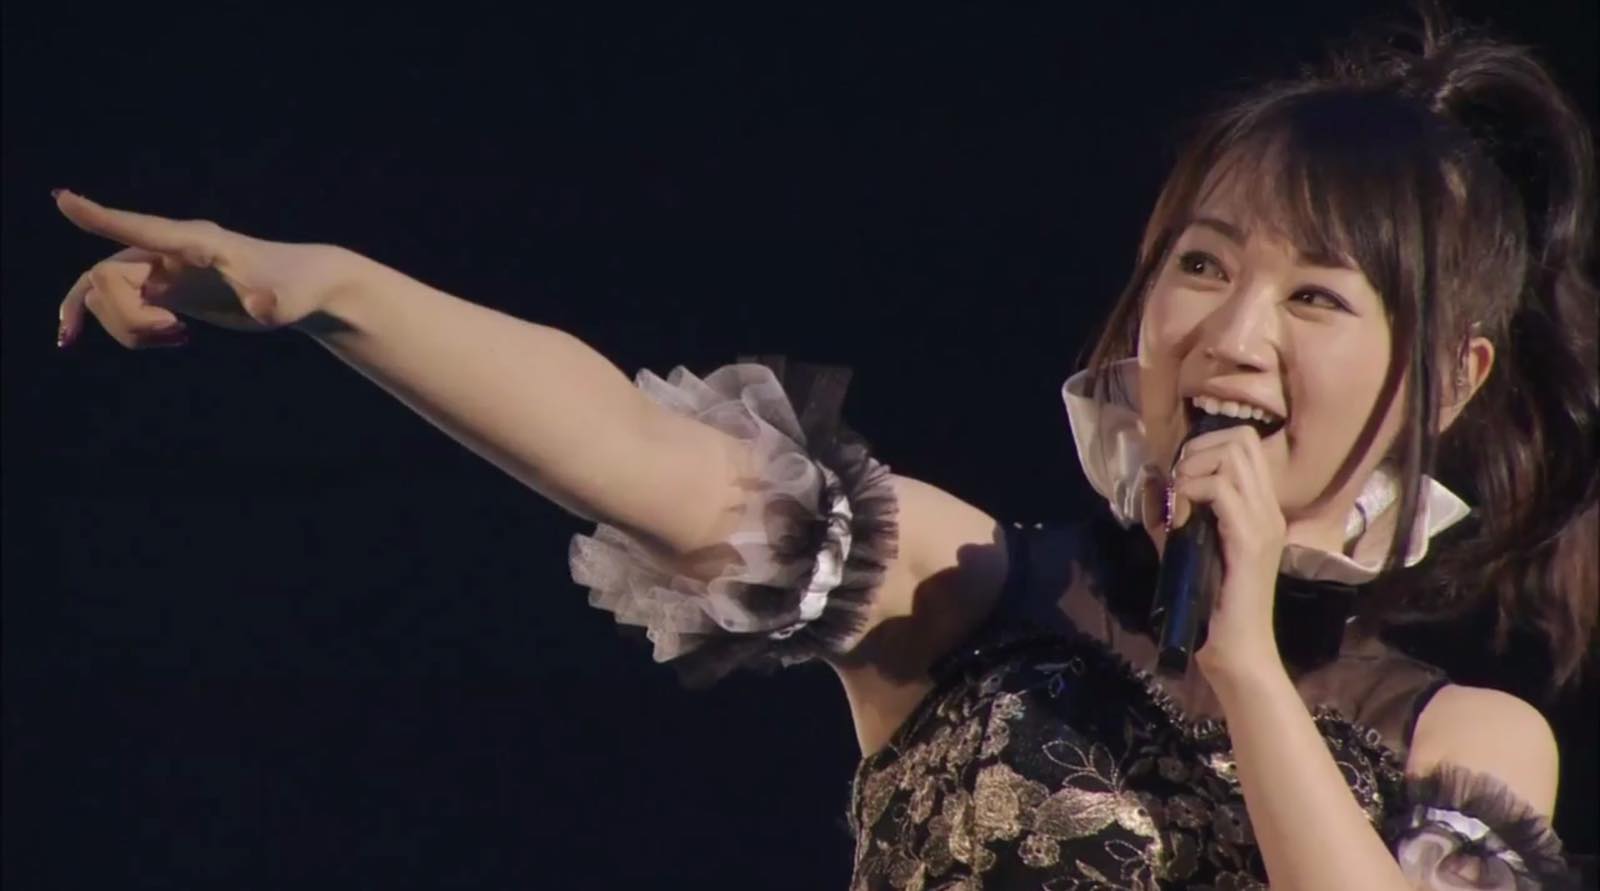 Nana Mizuki Presents Luxurious Preview Clips From “LIVE THEATER -ACOUSTIC-” DVD/Blu-ray!